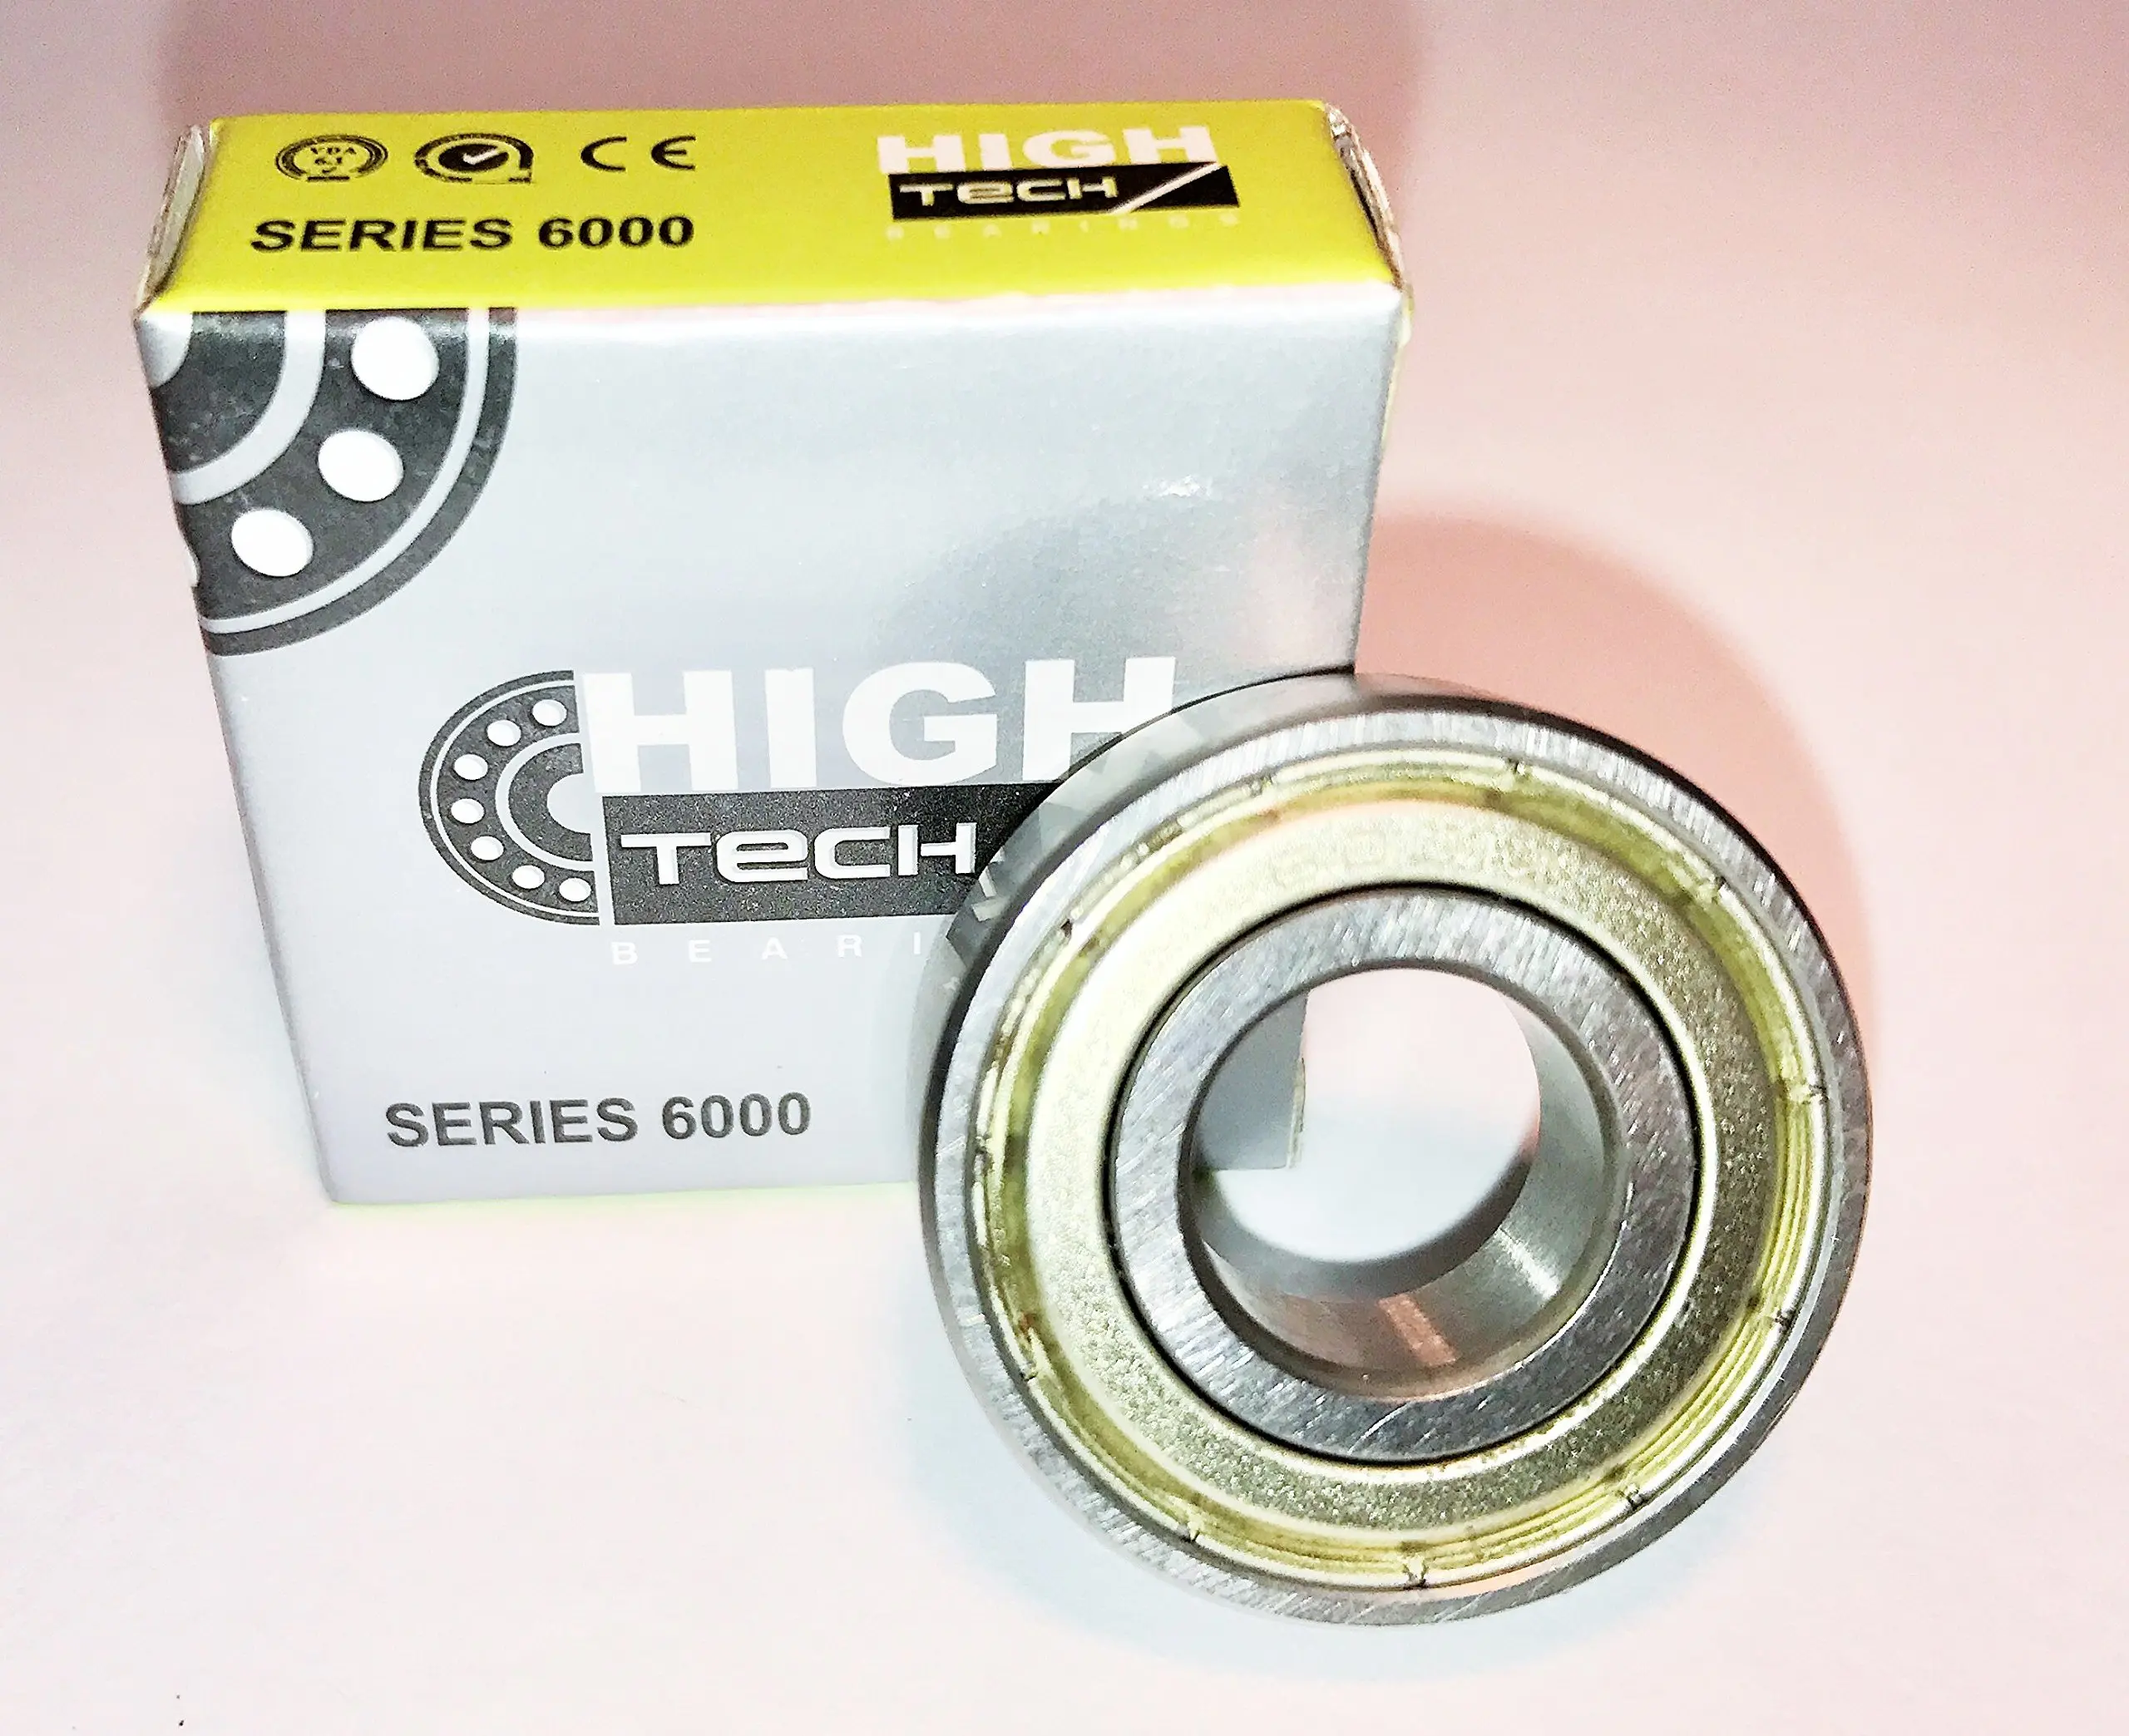 Rubber Double Sealed 12x32x10 mm 6201-2RS//C3 High Tech Bearings Pre-lubricated Metric Deep Groove Ball Bearing Steel Cage